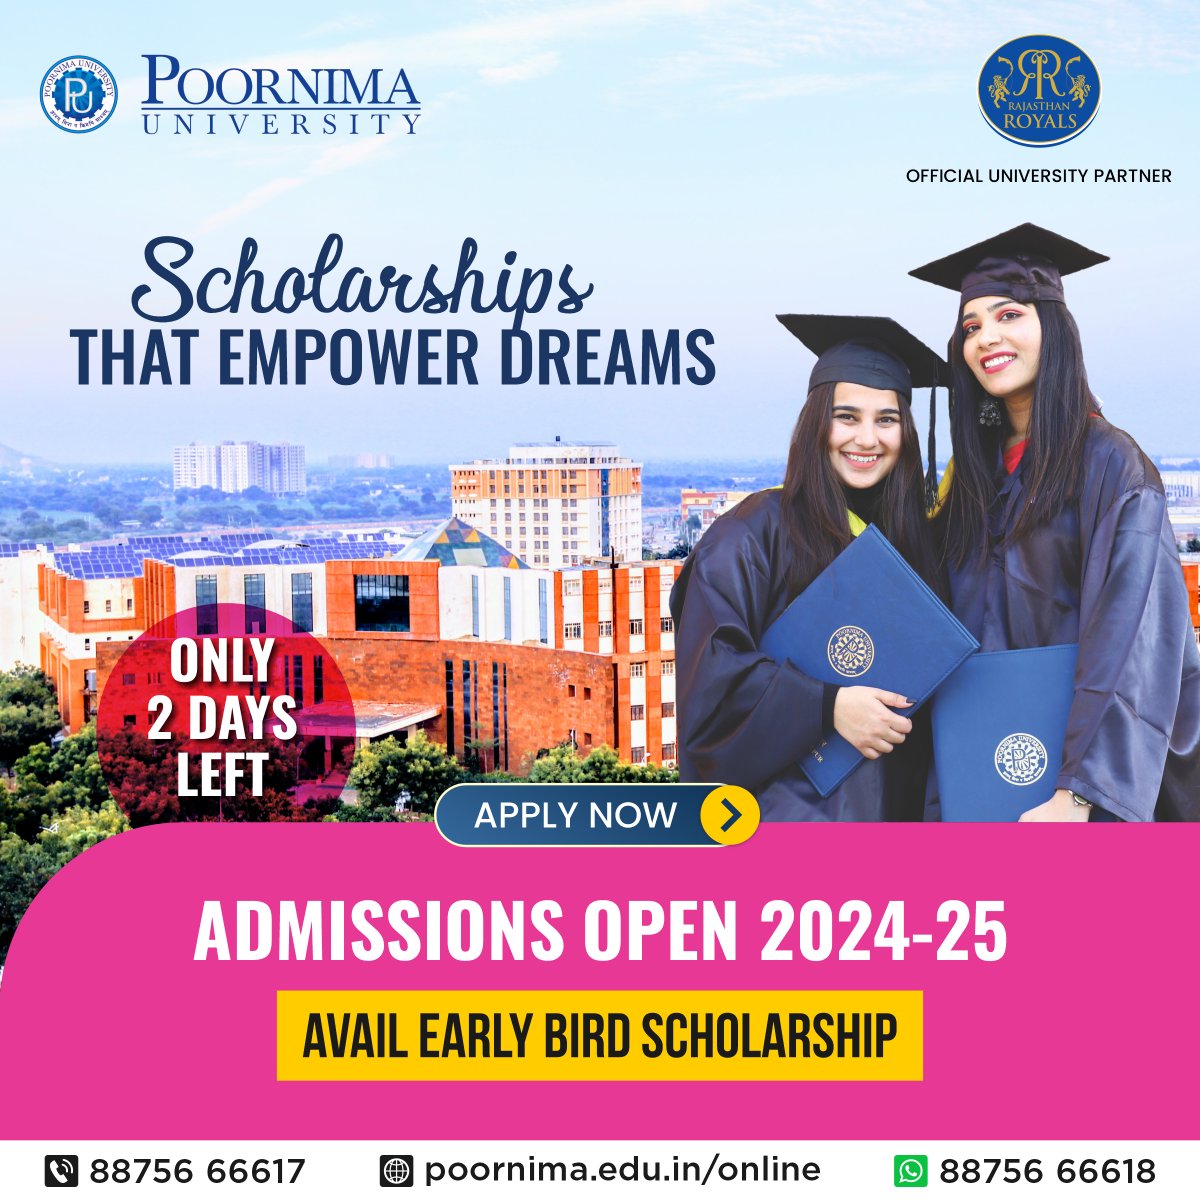 Just 2 days left to seize the Early Bird Scholarship opportunity at Poornima University! Admissions Open 2024 Apply Now: bit.ly/PU-Adm-2024